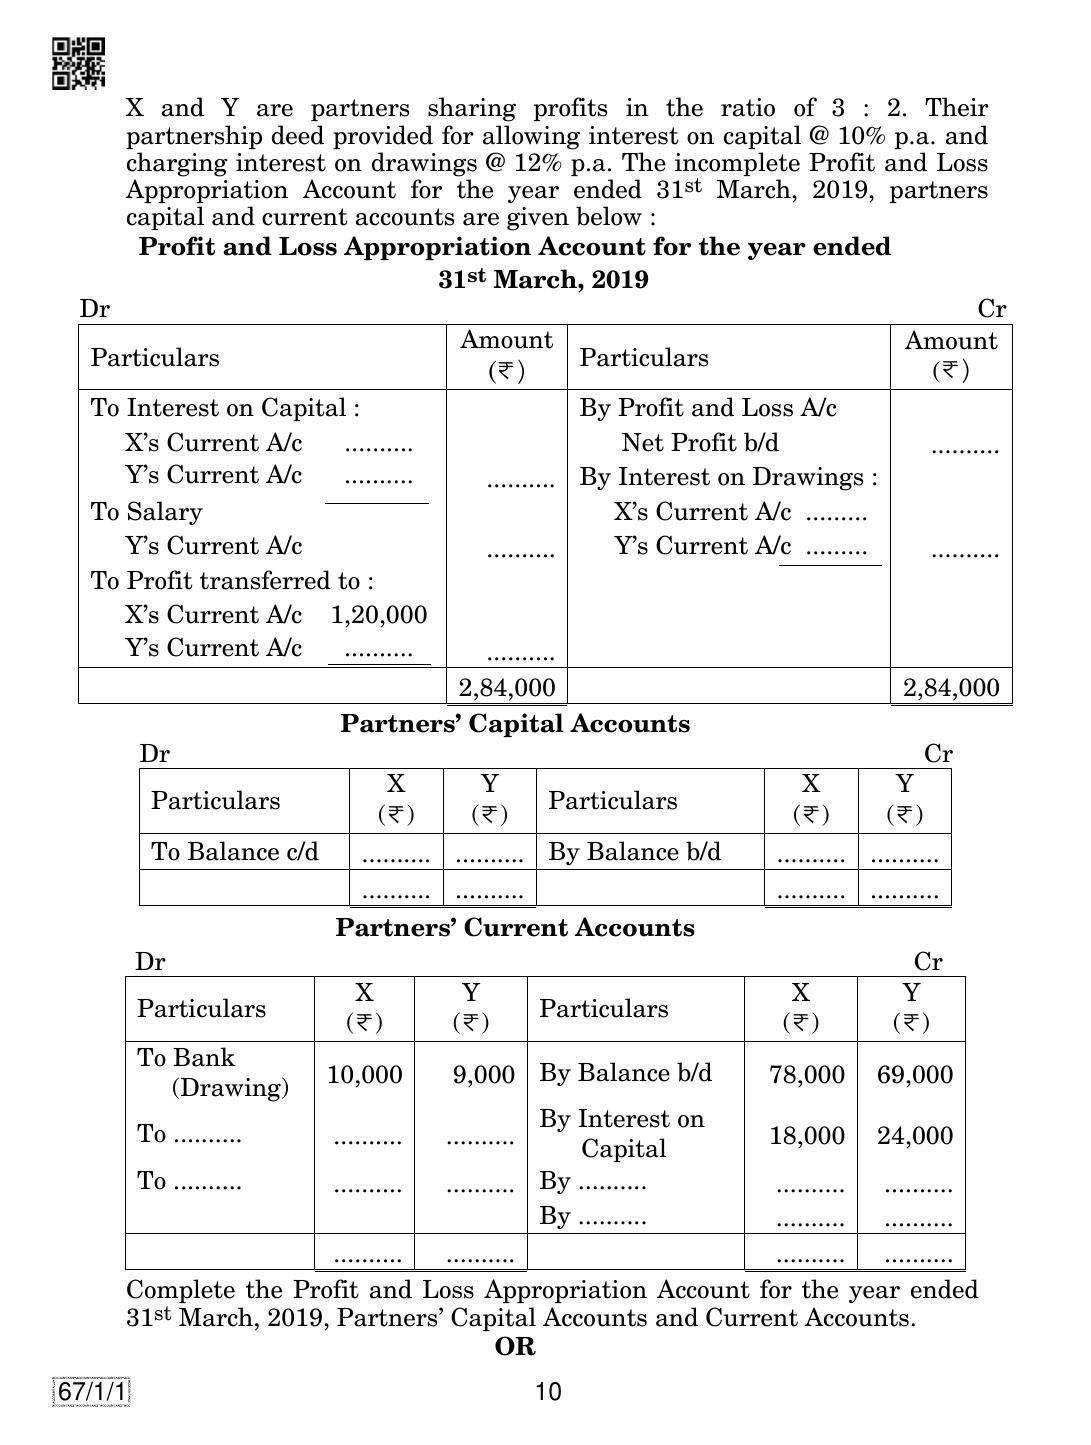 CBSE Class 12 67-1-1 ACCOUNTANCY 2019 Compartment Question Paper - Page 10